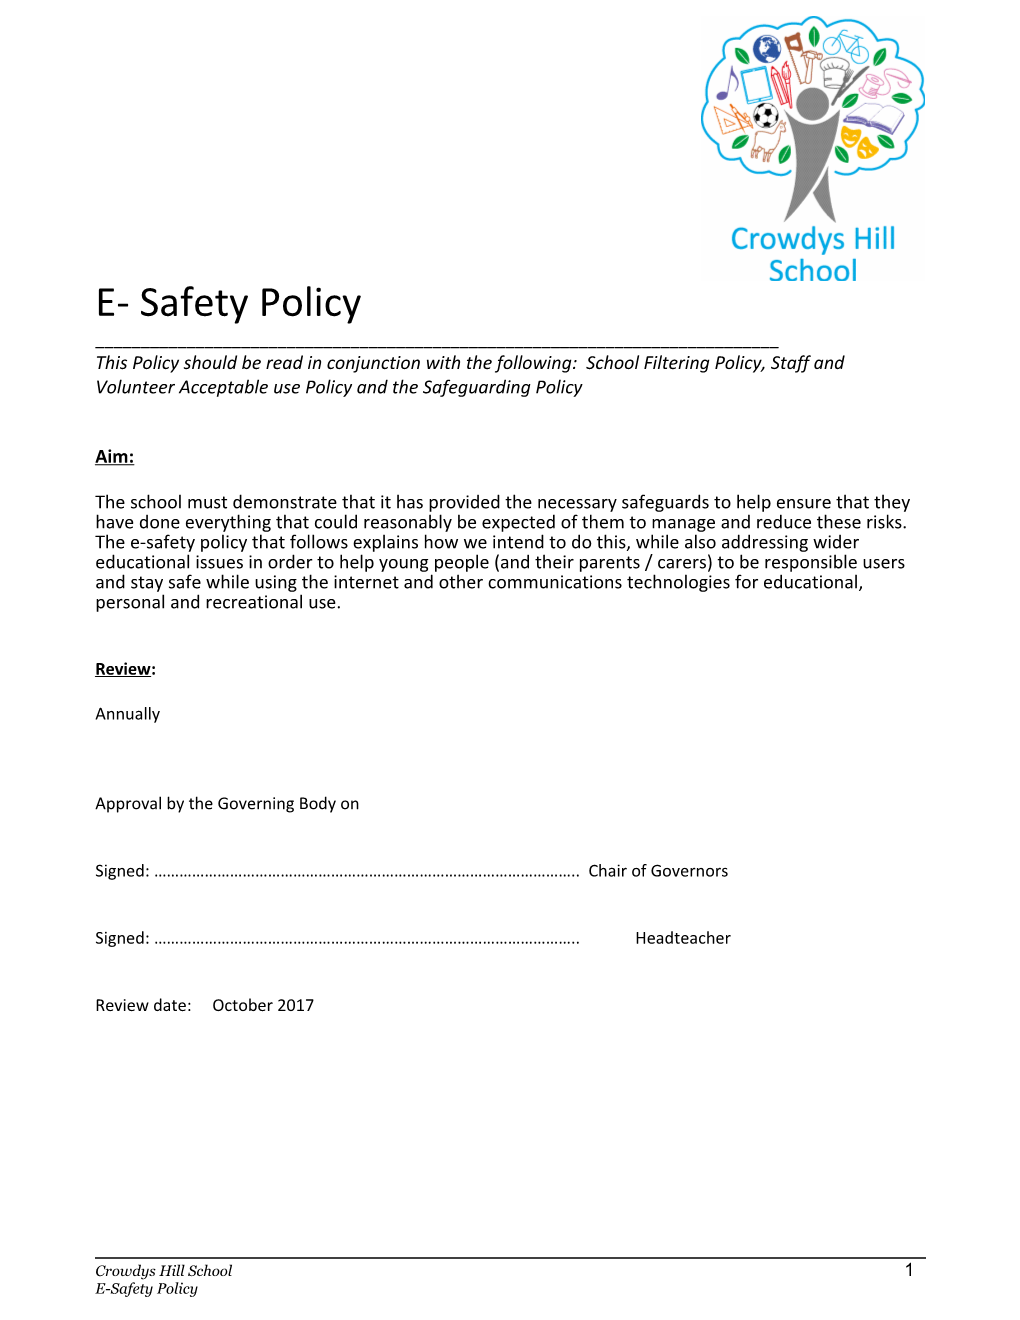 Crowdys Hill School E-Safety Policy Draft